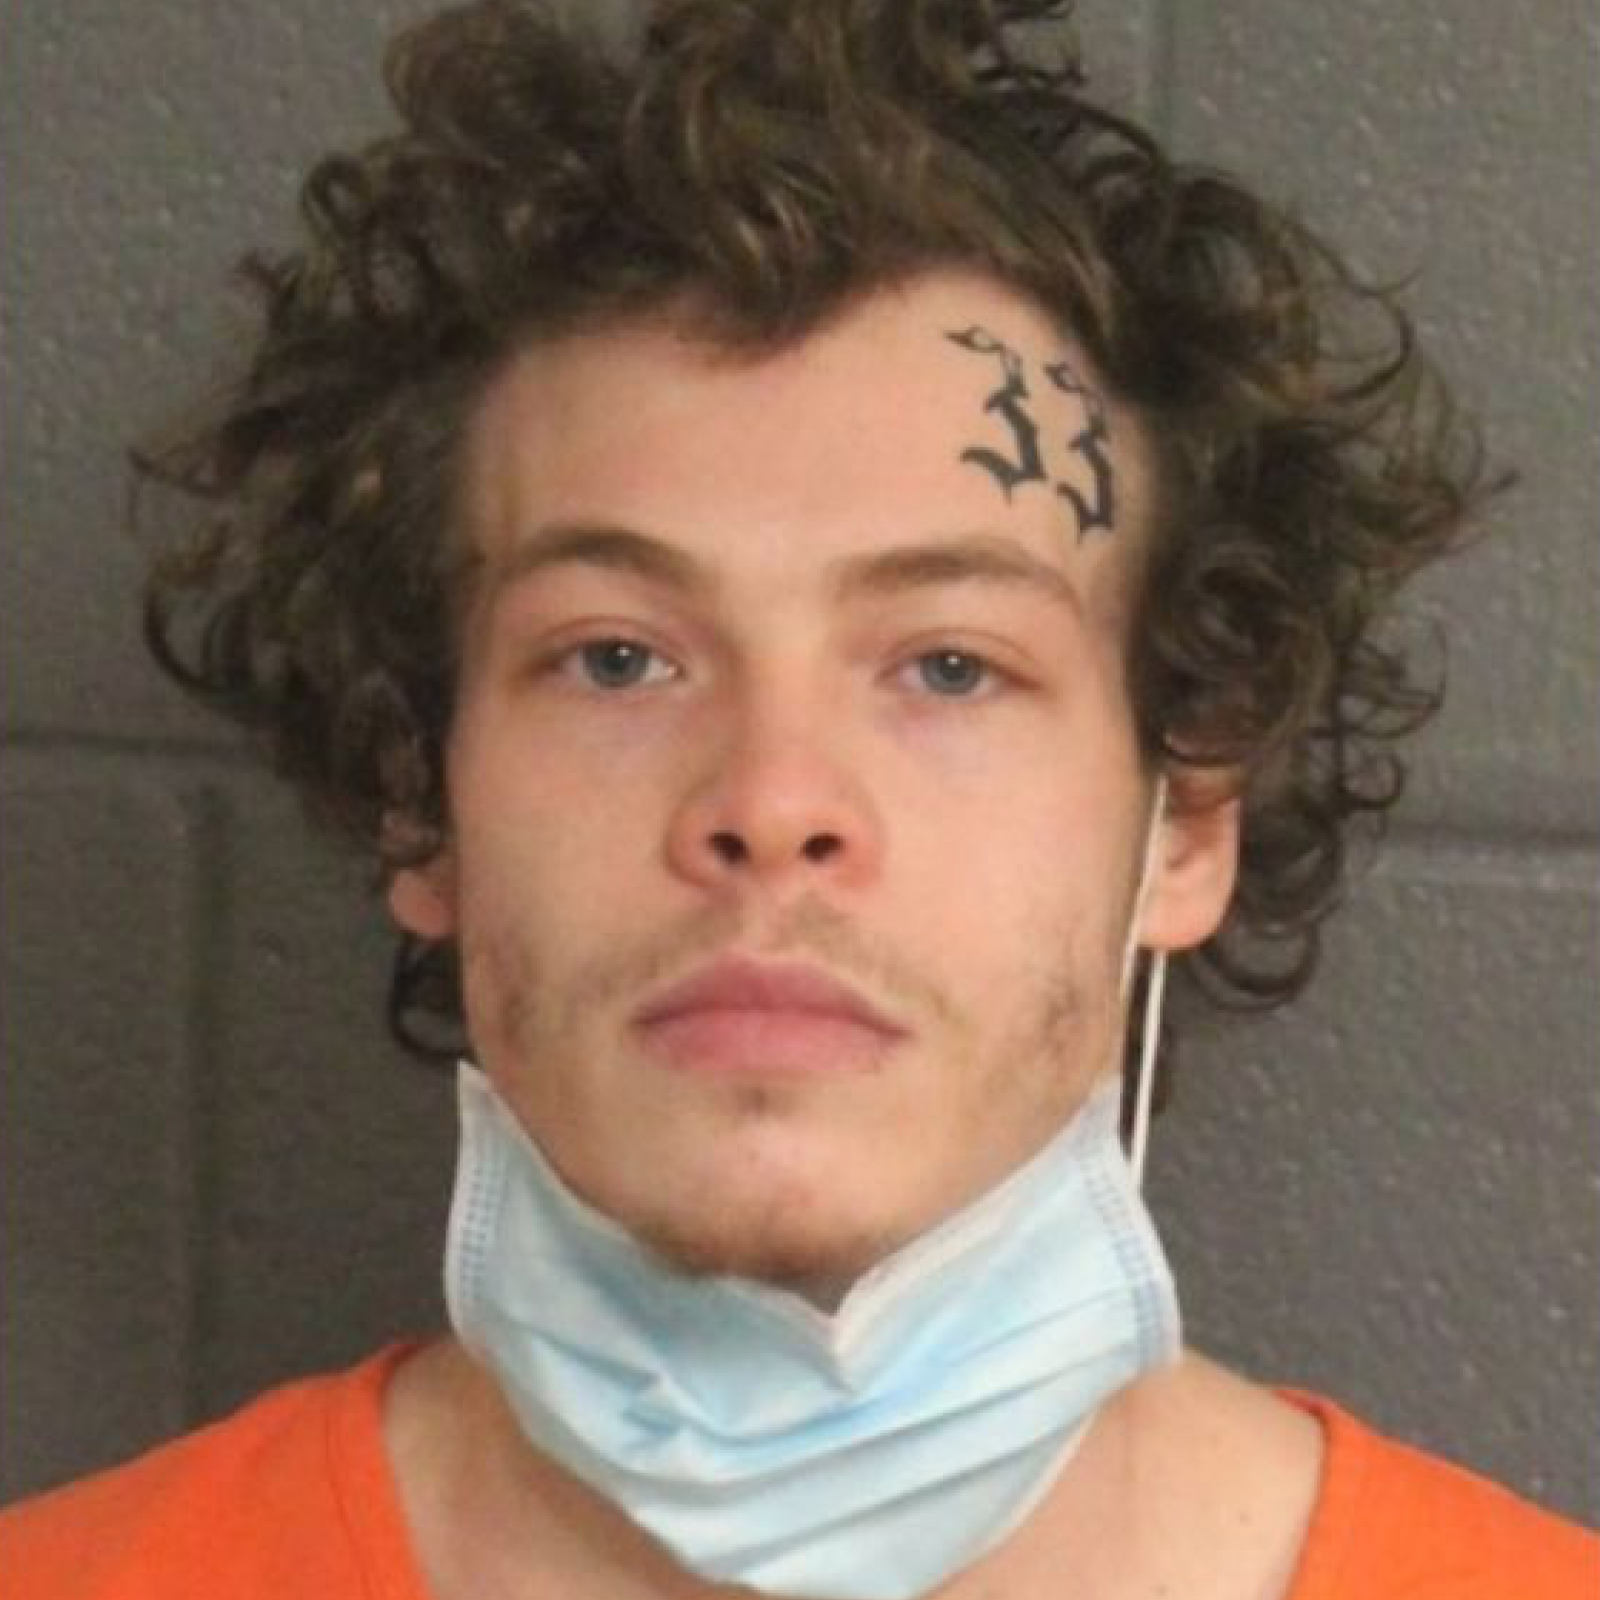 Harry Styles Lookalike Arrested for Pennsylvania Armed Robbery